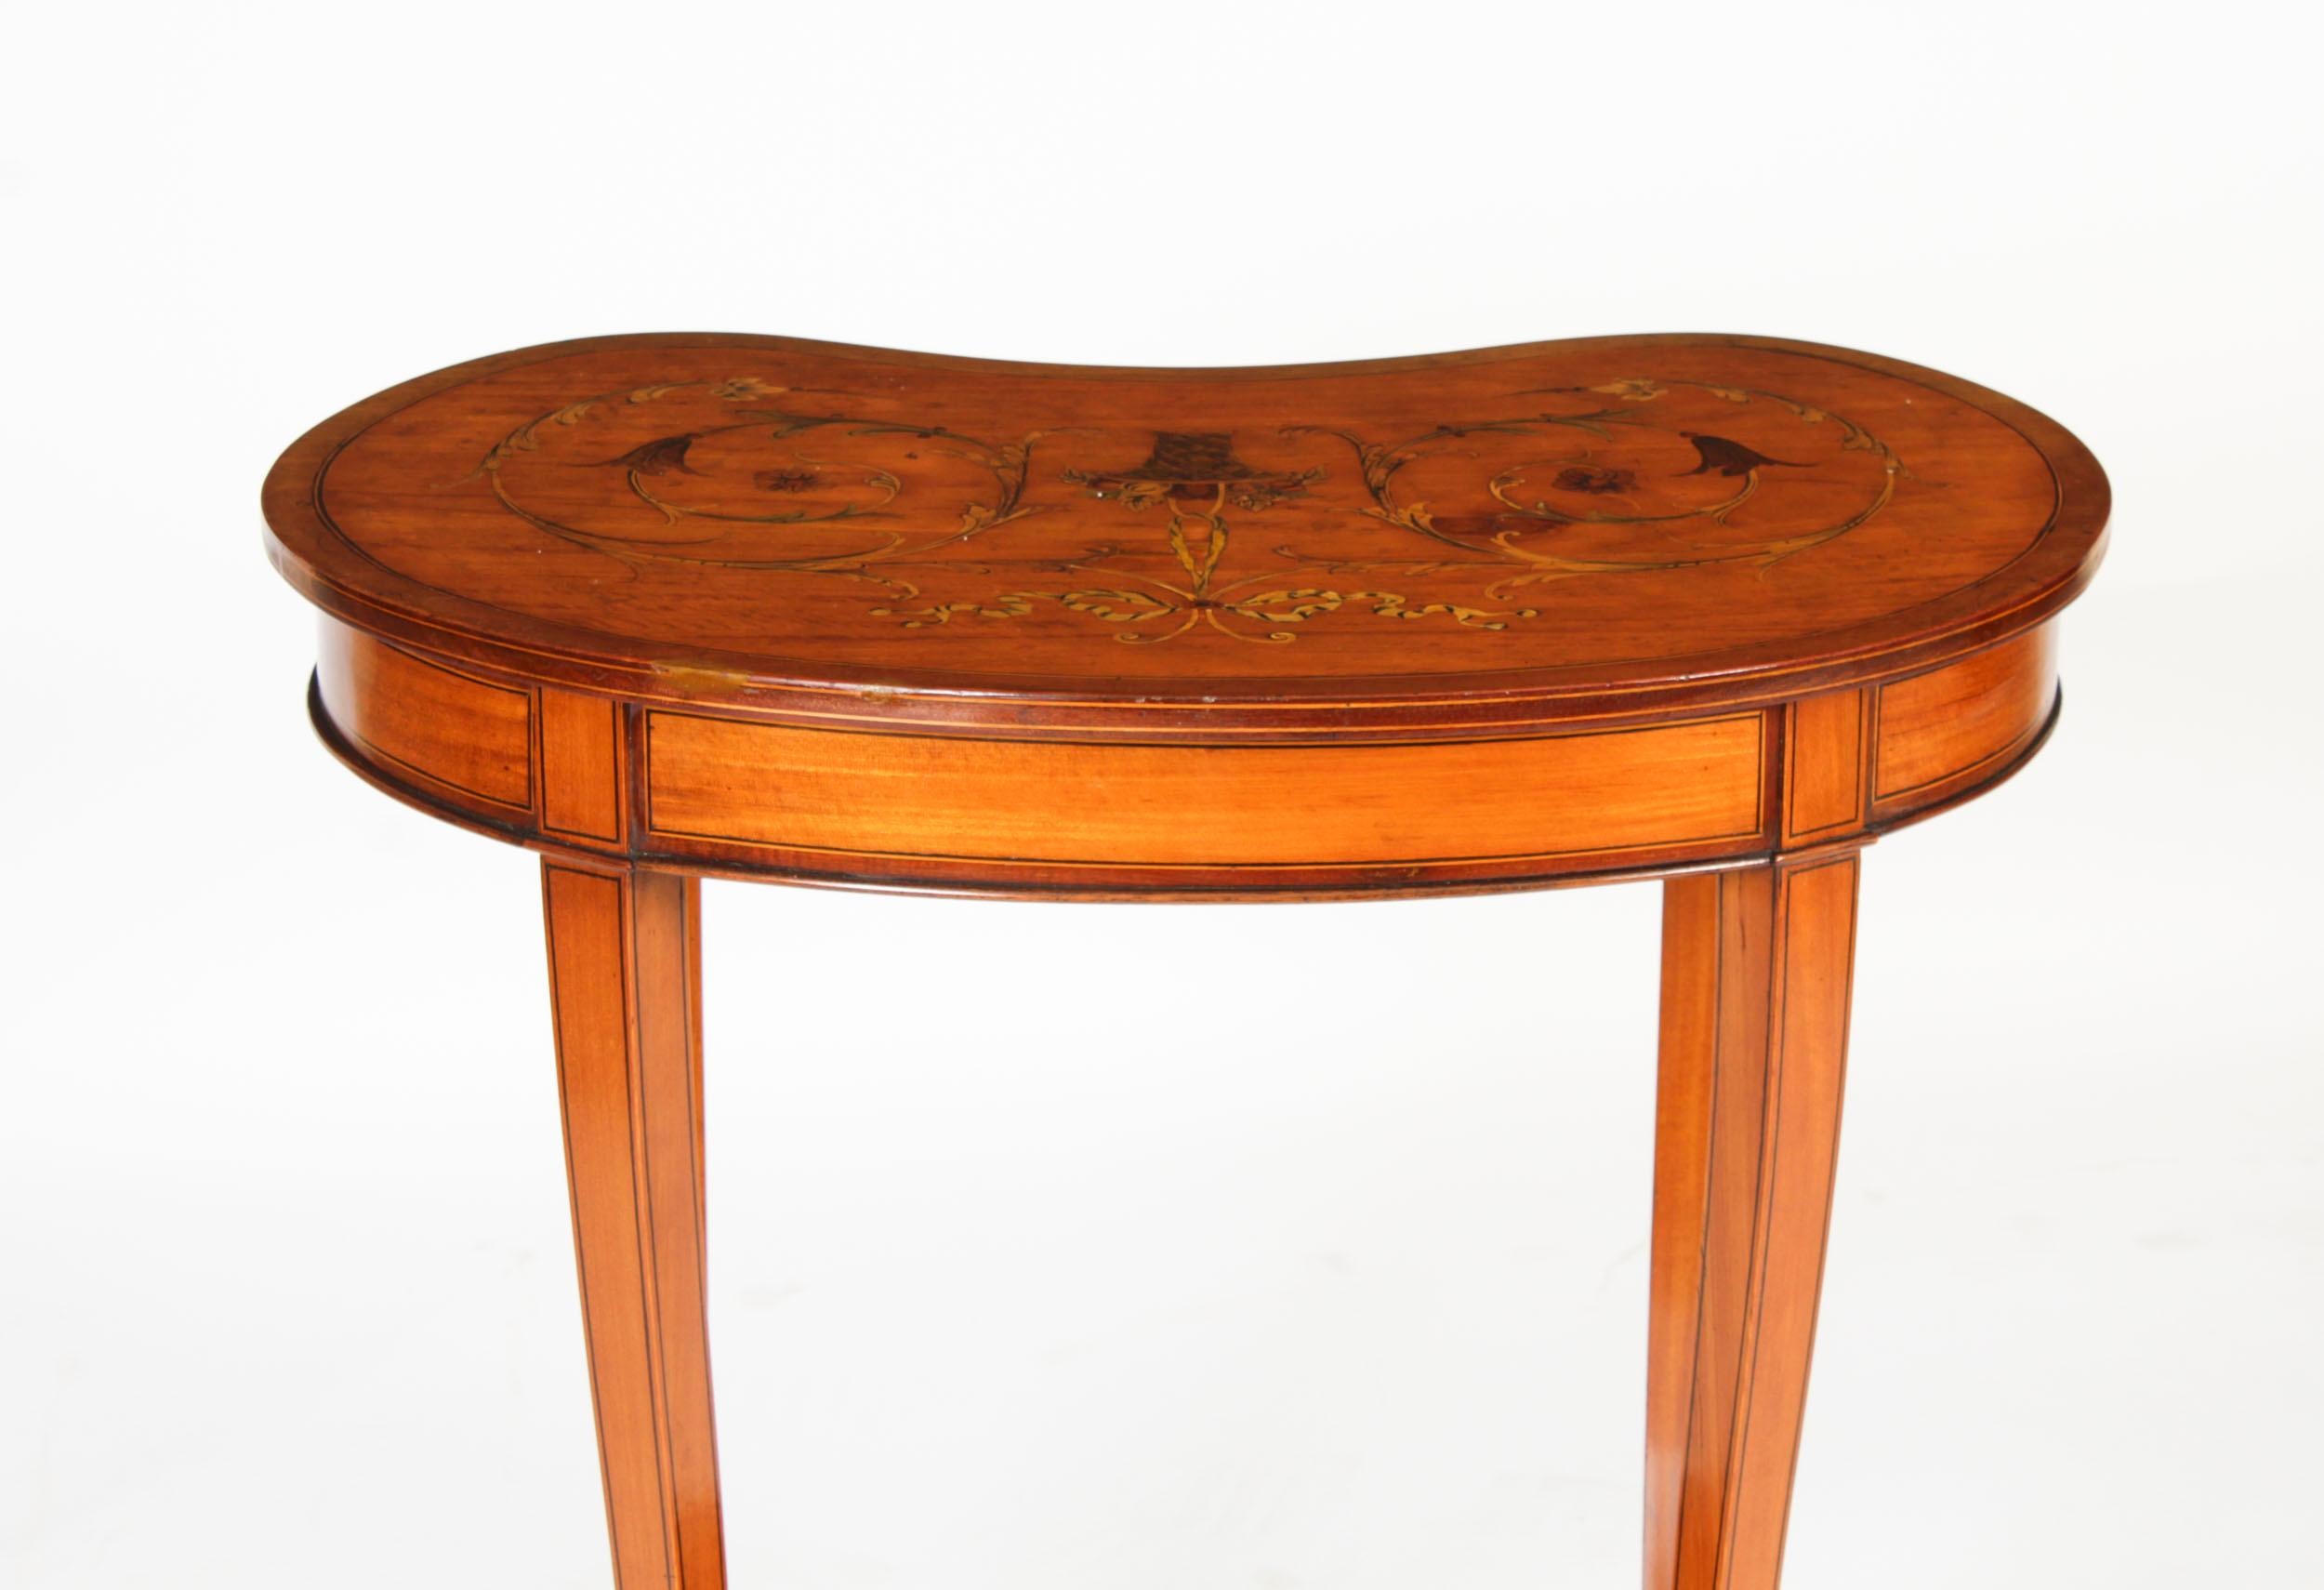 Antique English Marquetry Kidney Shaped Occasionally Tables 19th Century For Sale 12